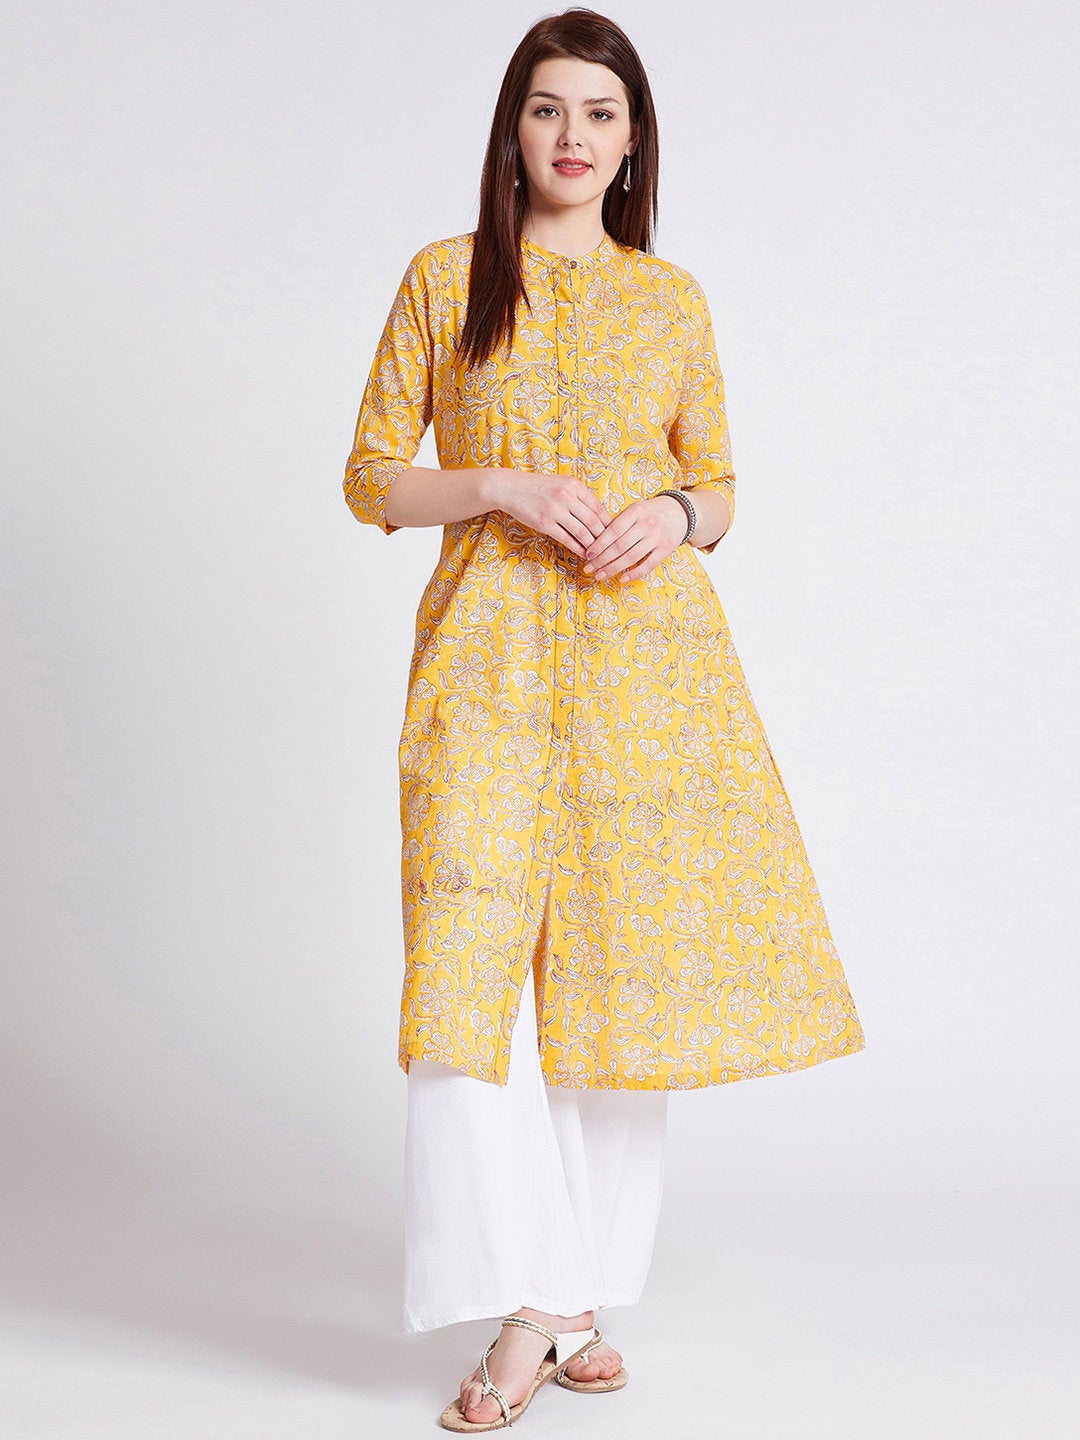 Hand block printed long kurta with front slit in turmeric yellow colour with pockets with button detailing on front